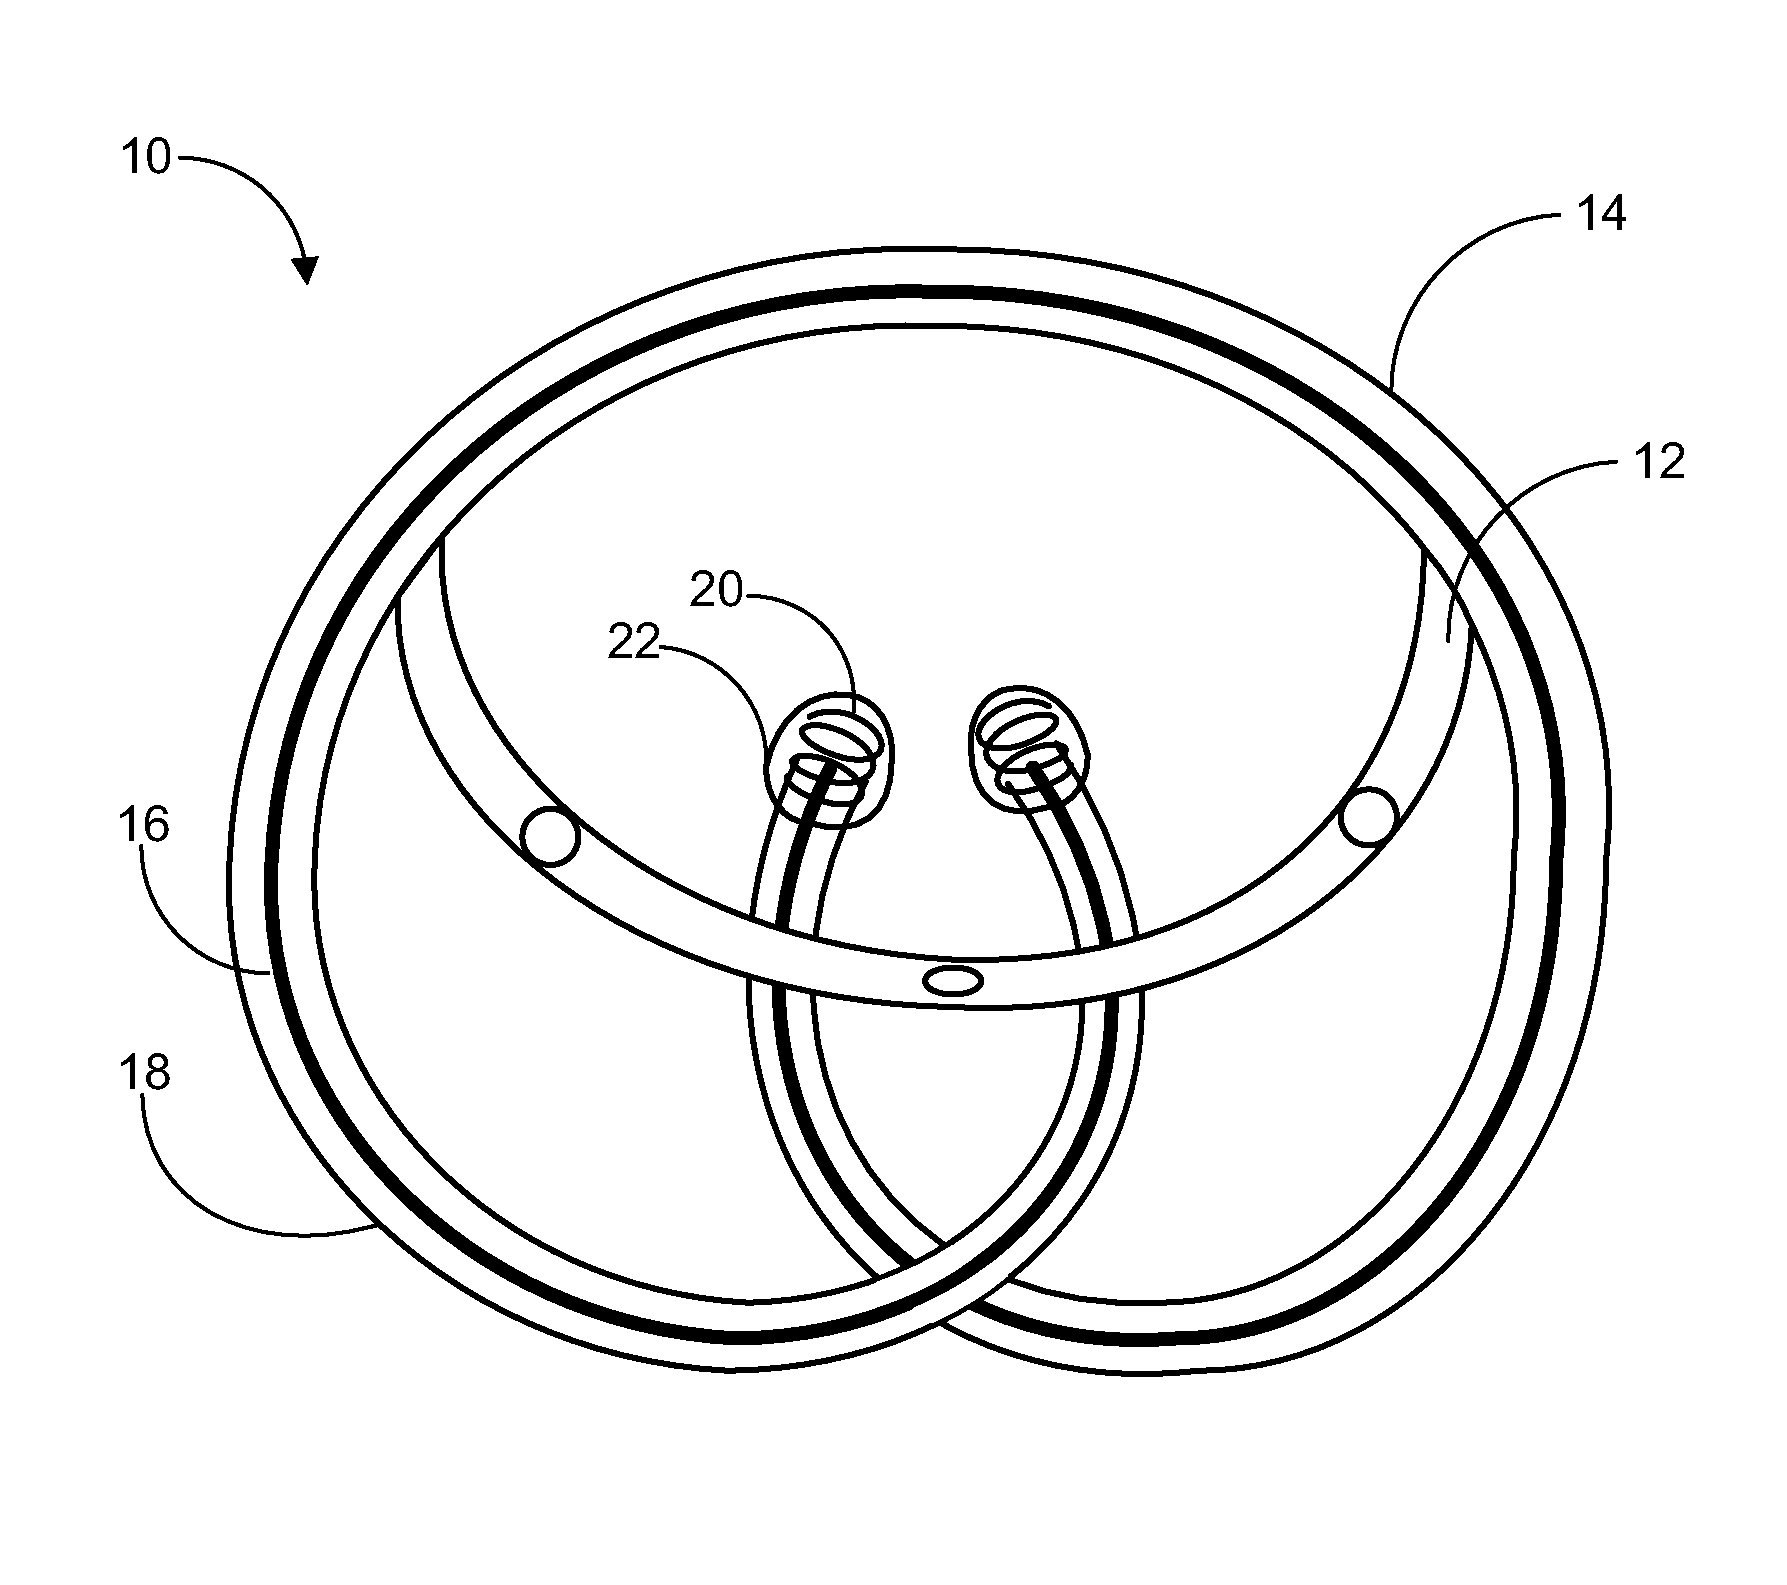 Implantable drug delivery device and methods for treatment of the bladder and other body vesicles or lumens